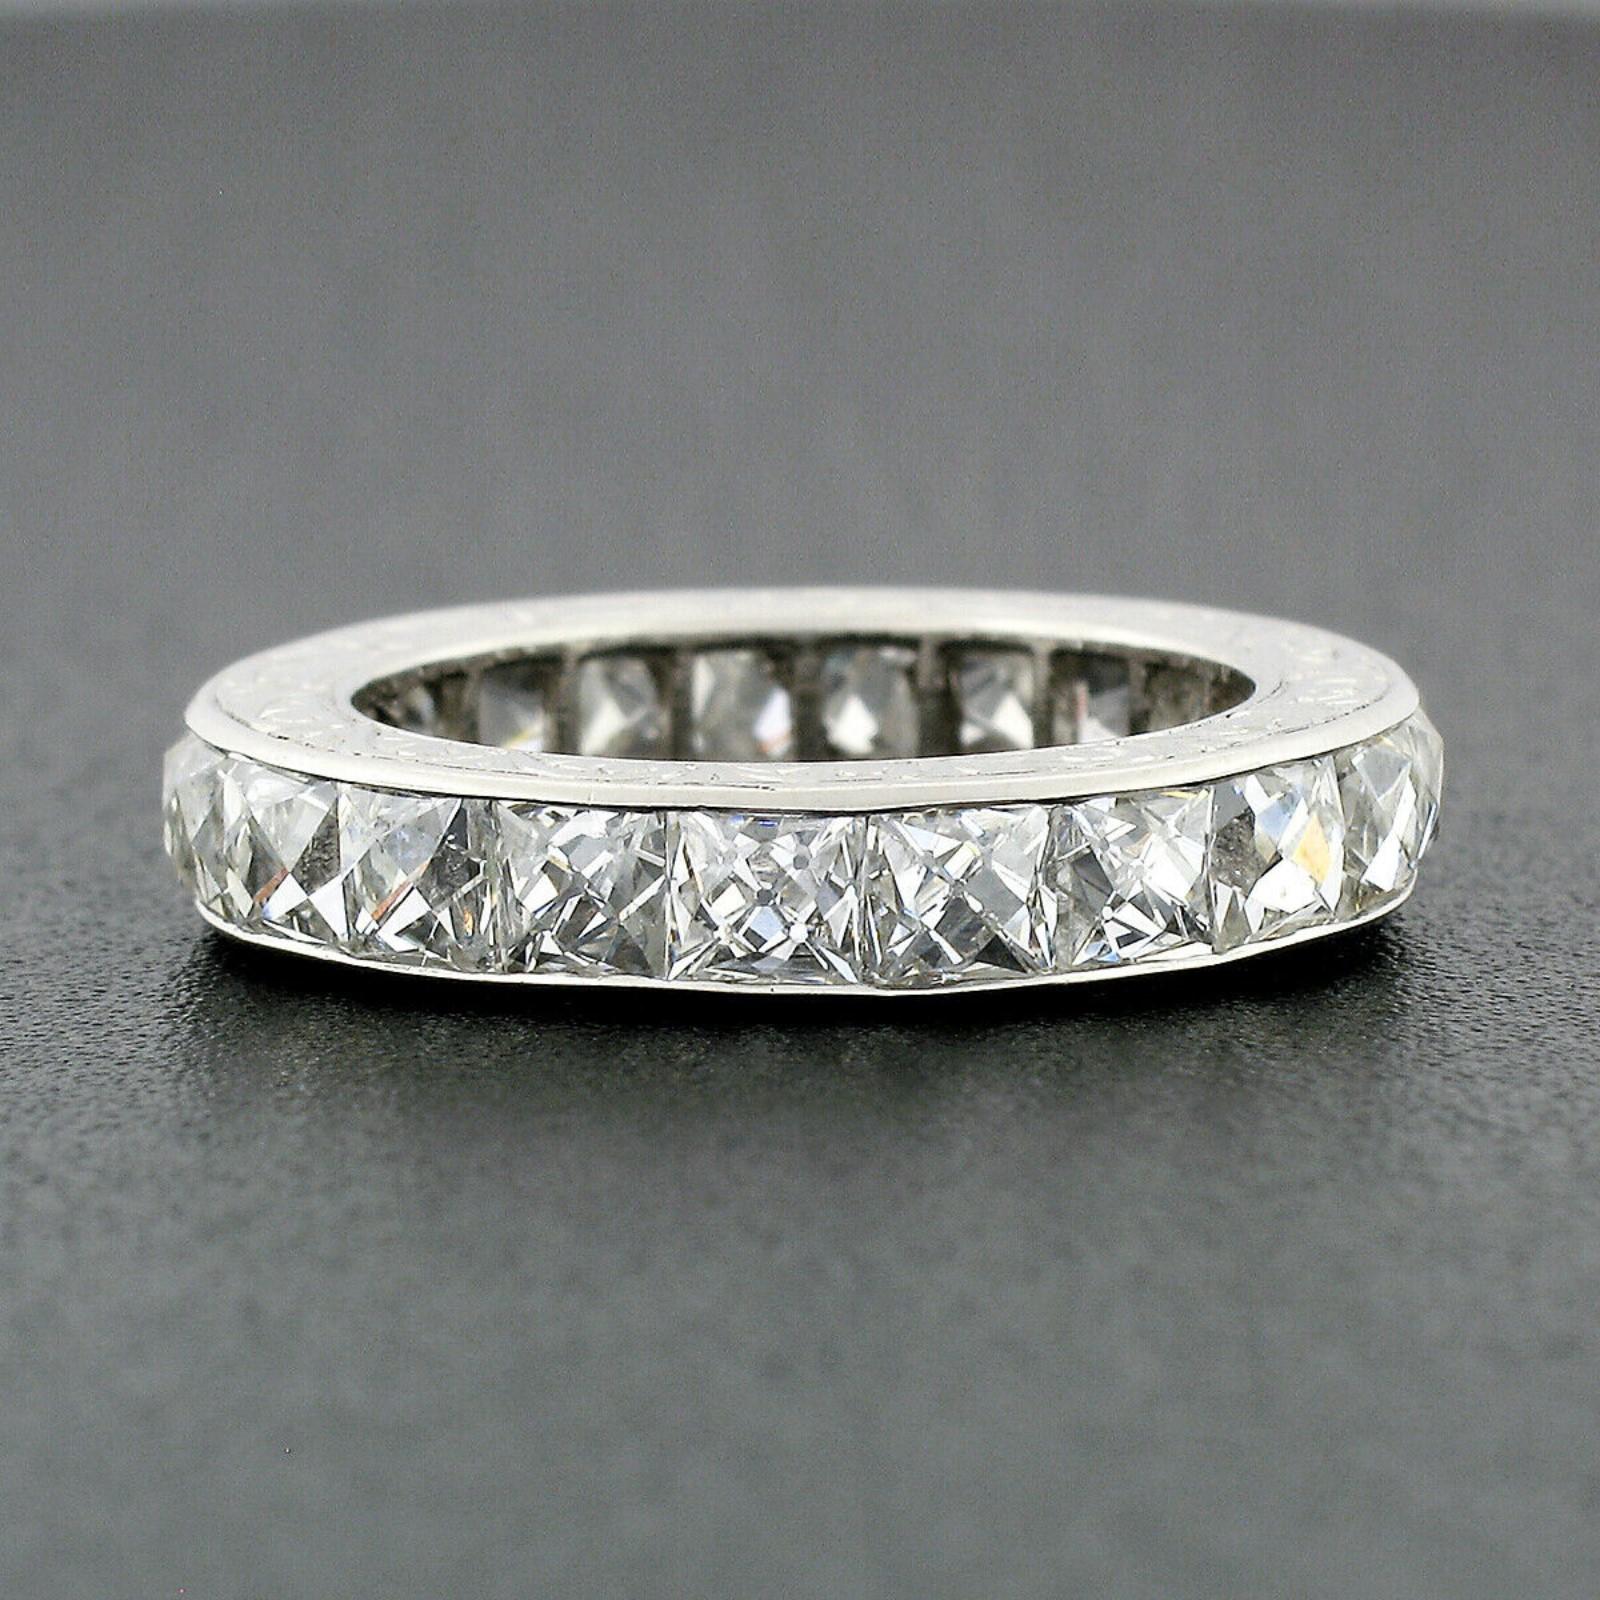 This absolutely stunning antique diamond eternity band ring was crafted from solid .900 platinum during the art deco period. It features a simple channel setting that carries 20 old French cut diamonds with open culet all the way around the band.